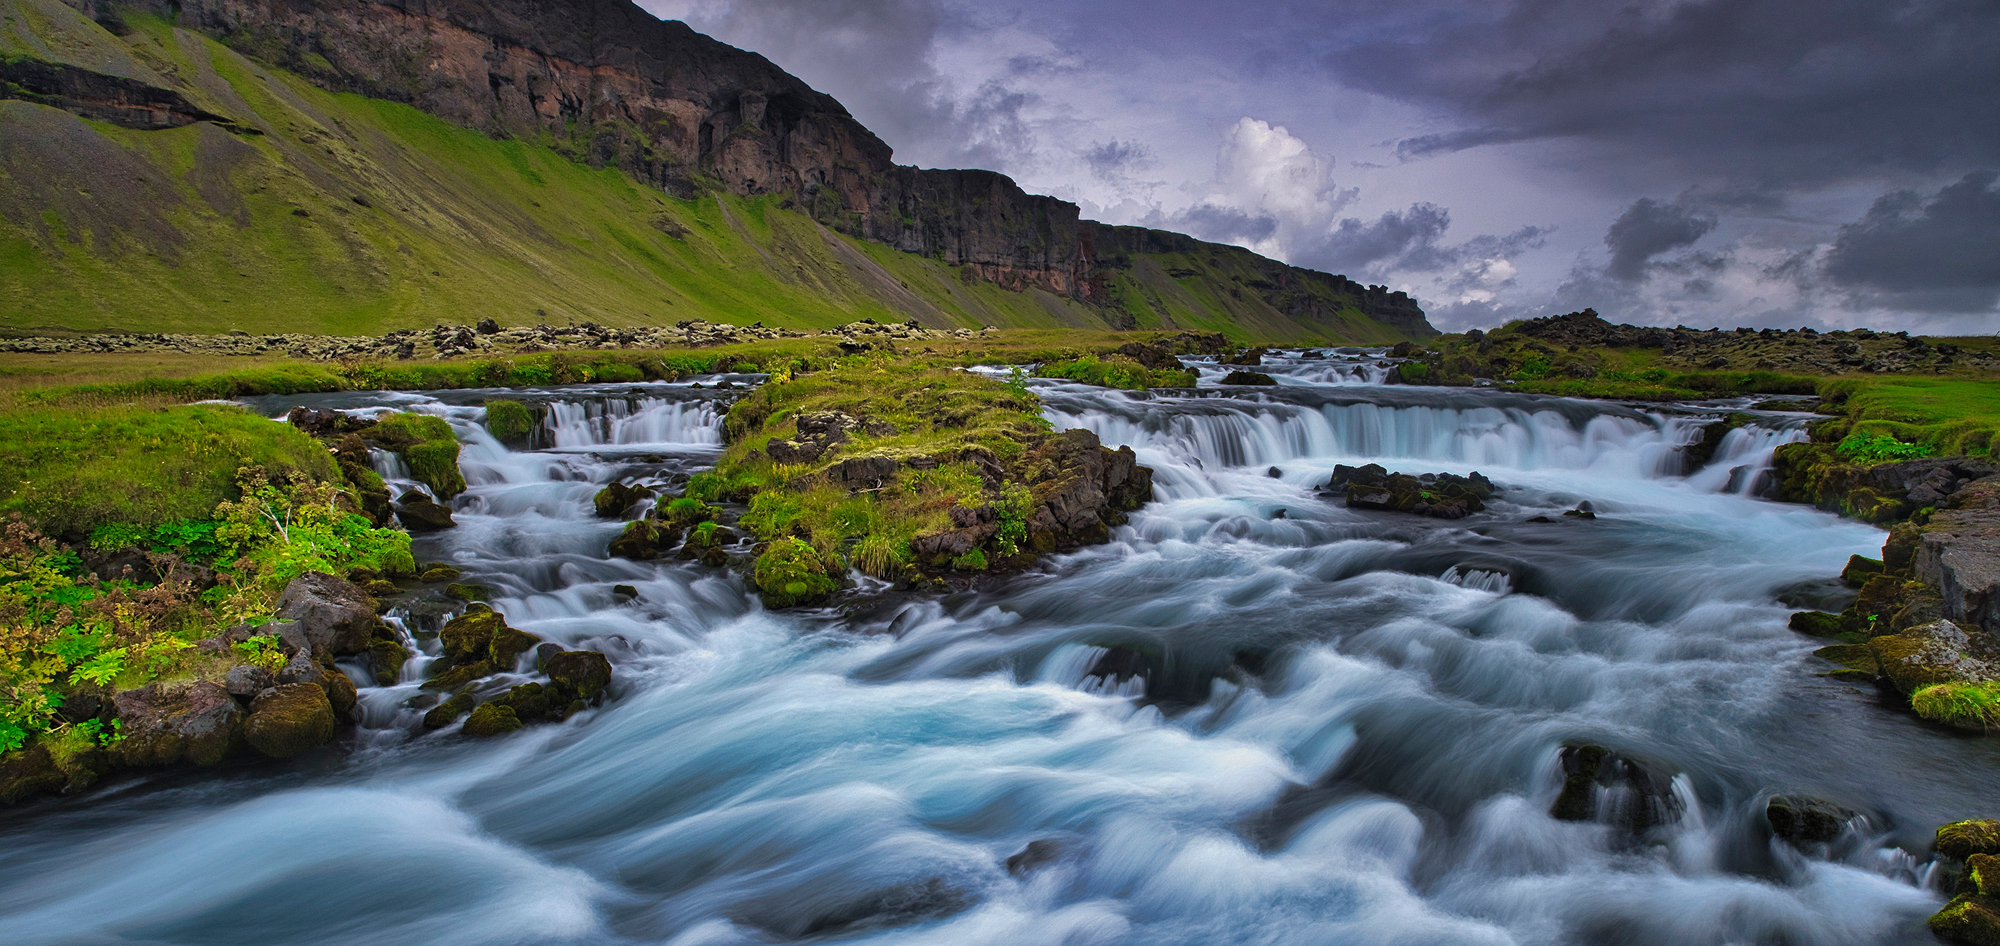 Another image of the falls in Iceland